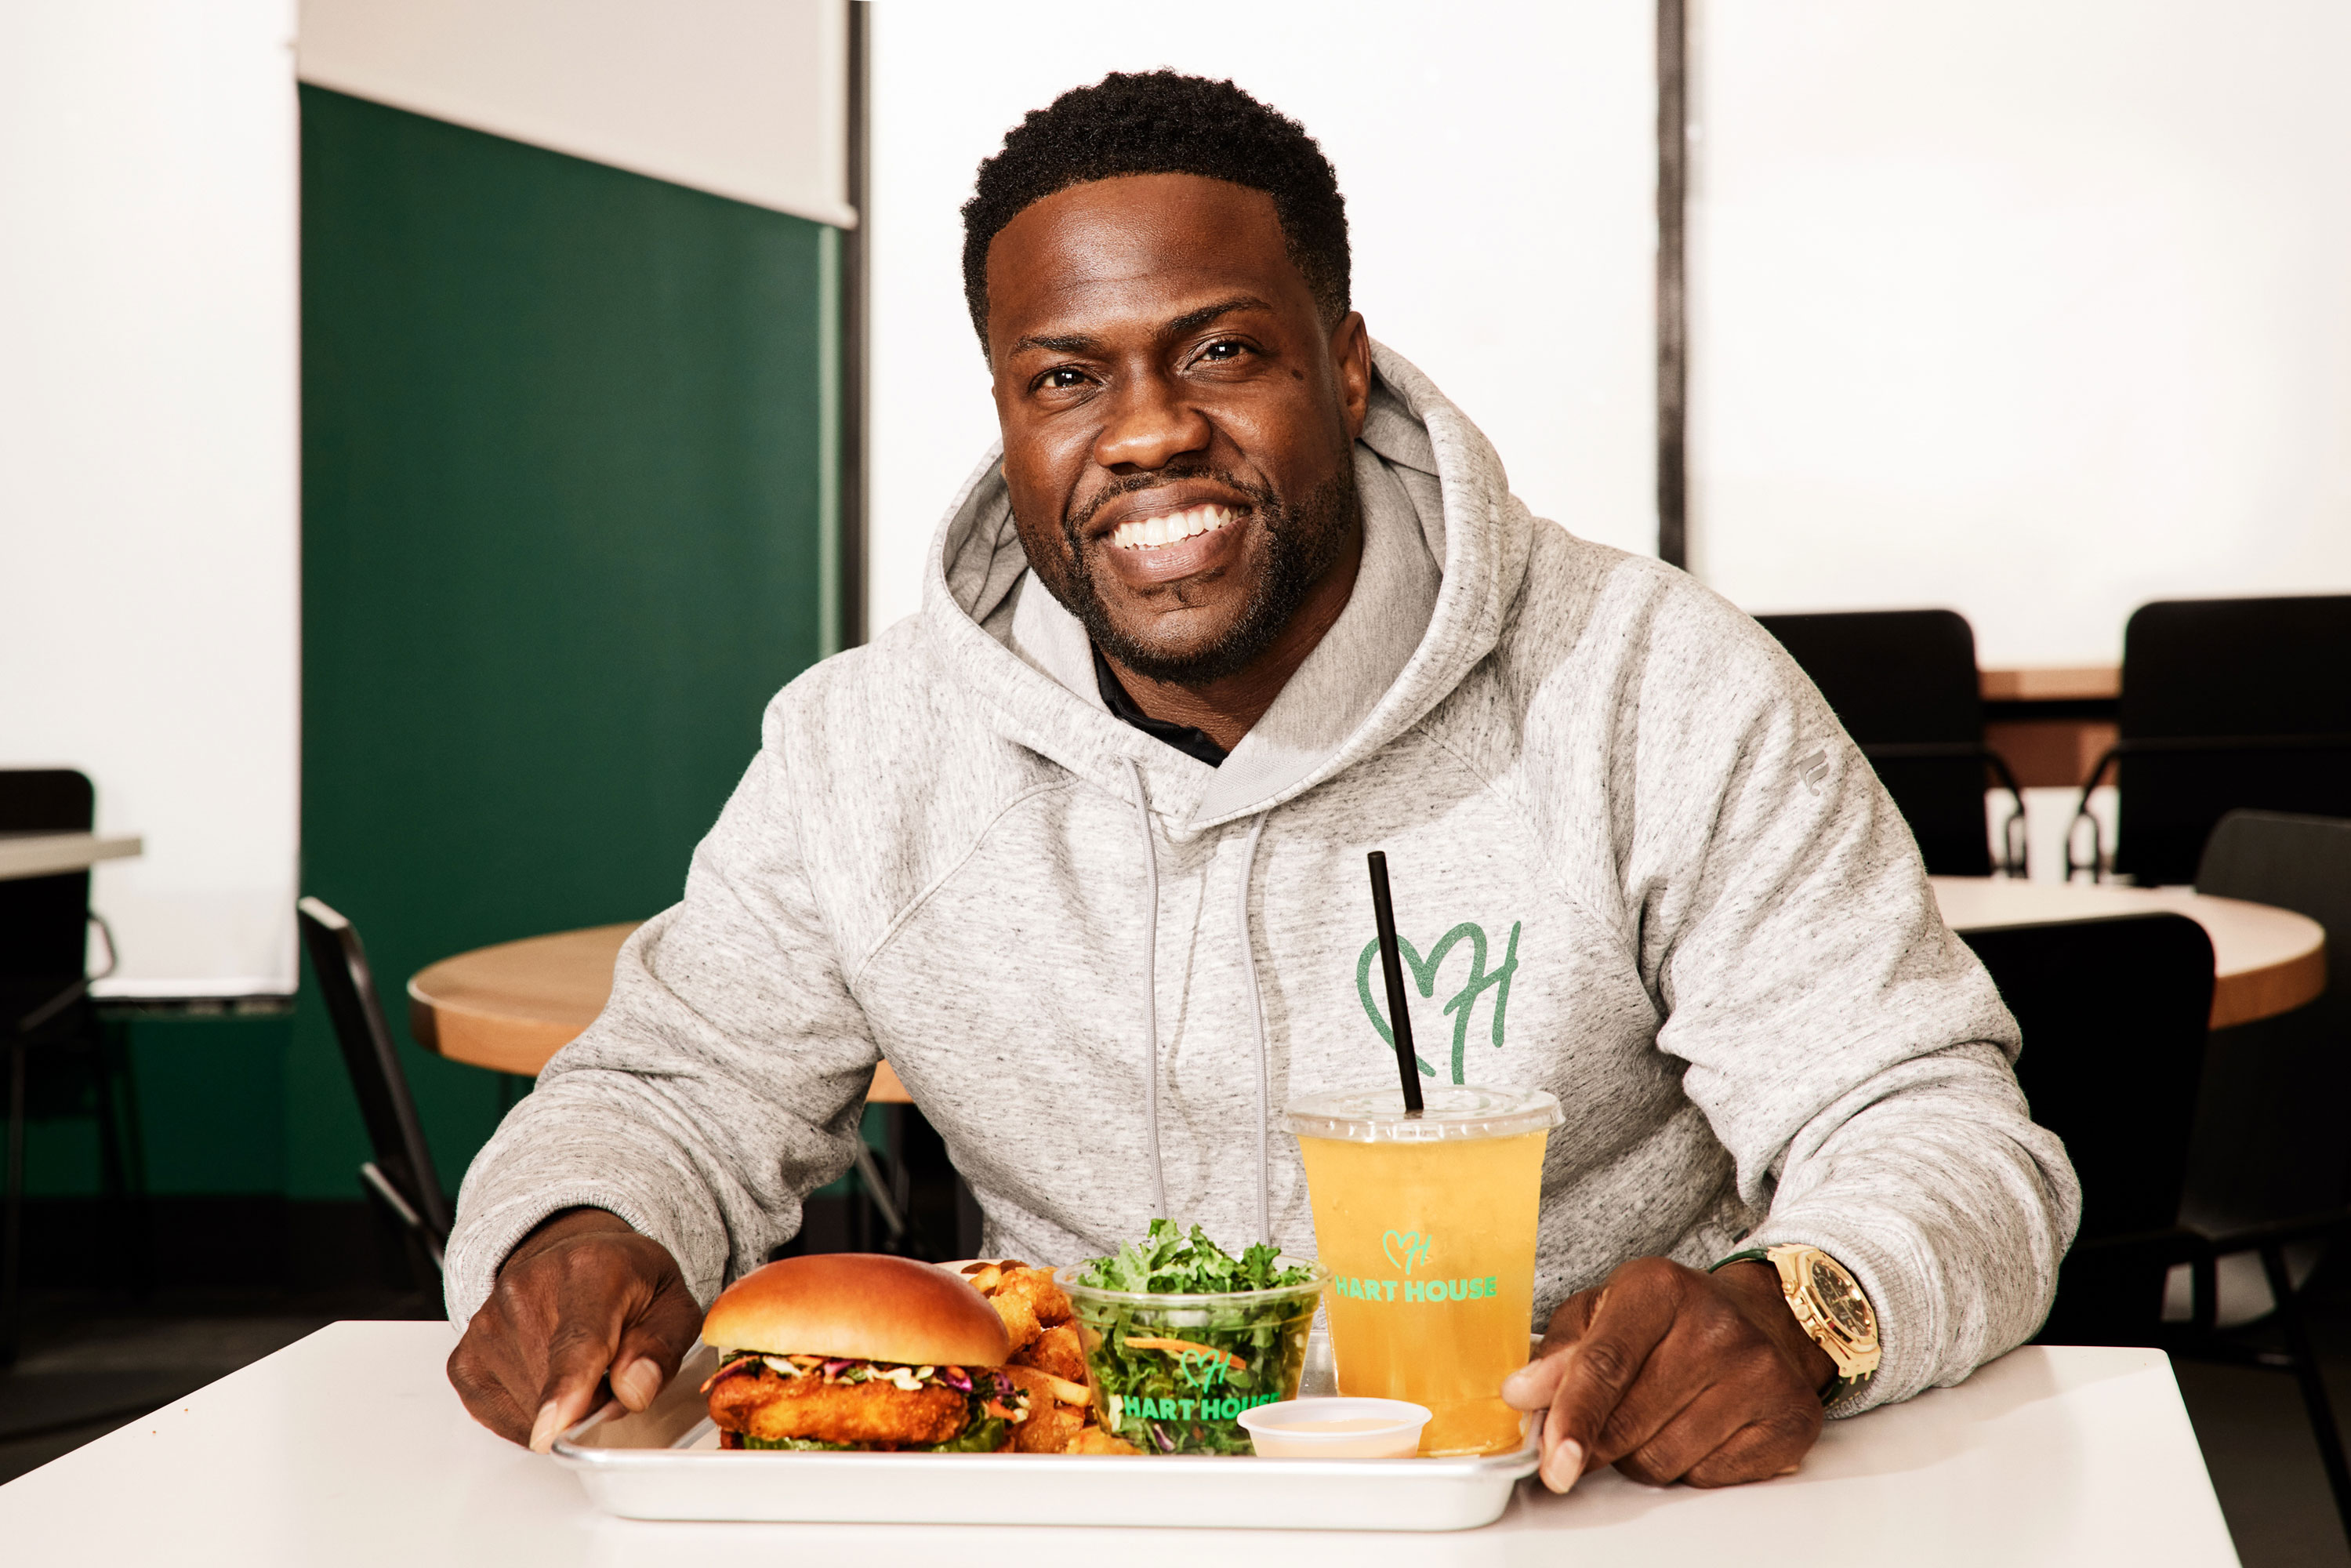 NYC’s Jerrell’s Betr Brgr Brings Better Vegan Burgers to New Jersey